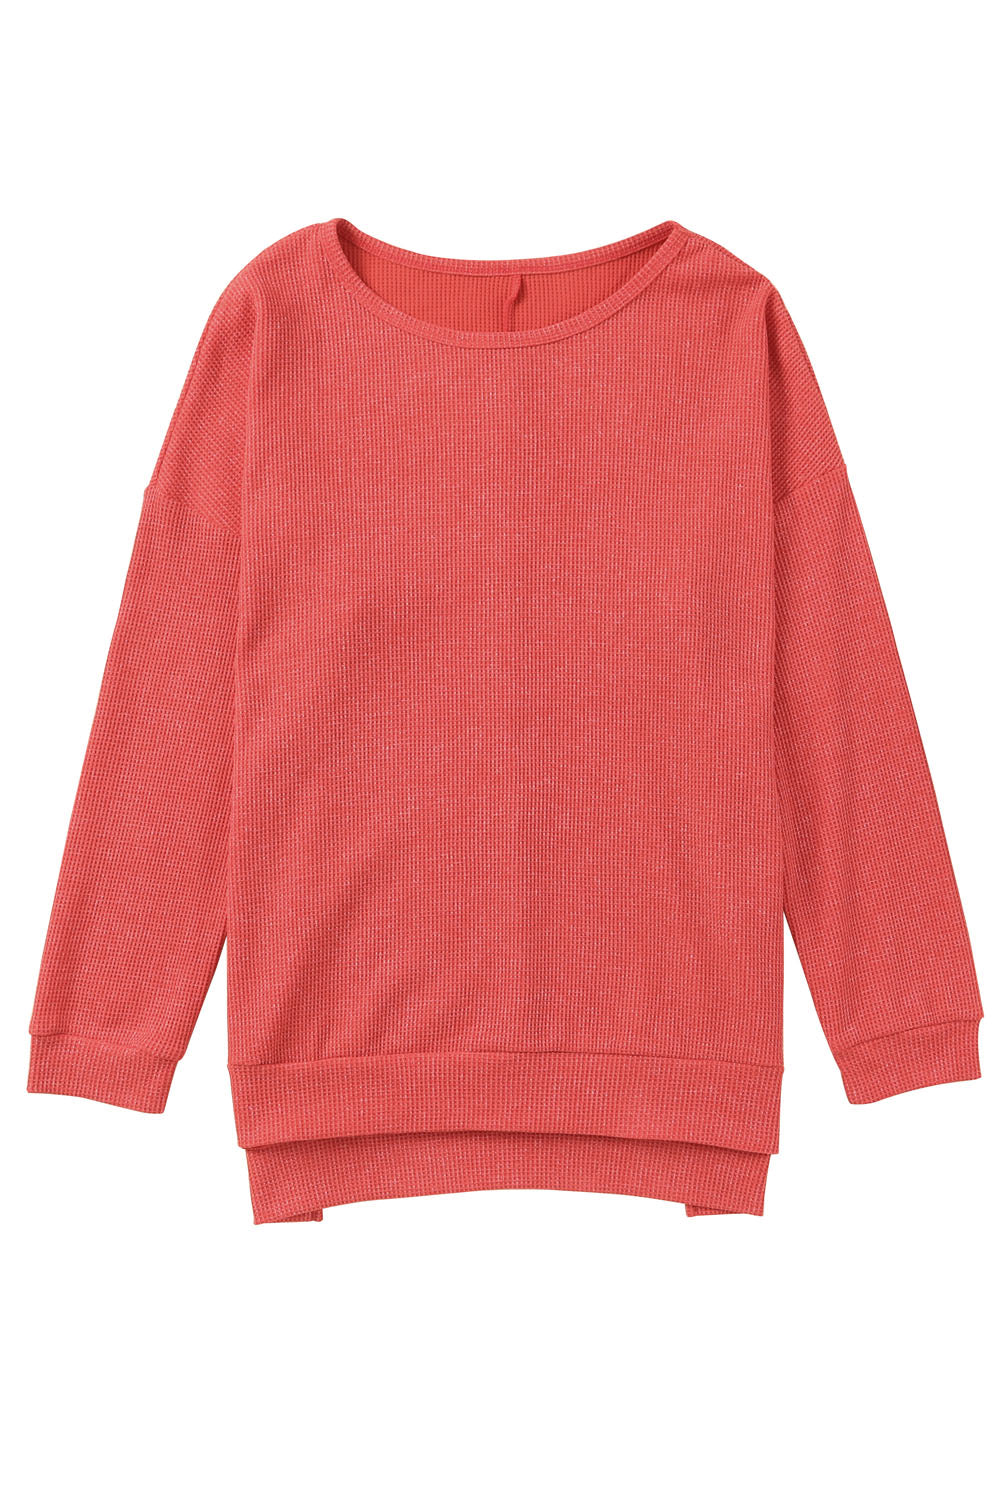 Red Waffle Knit Side Slit Pullover Long Sleeve Top